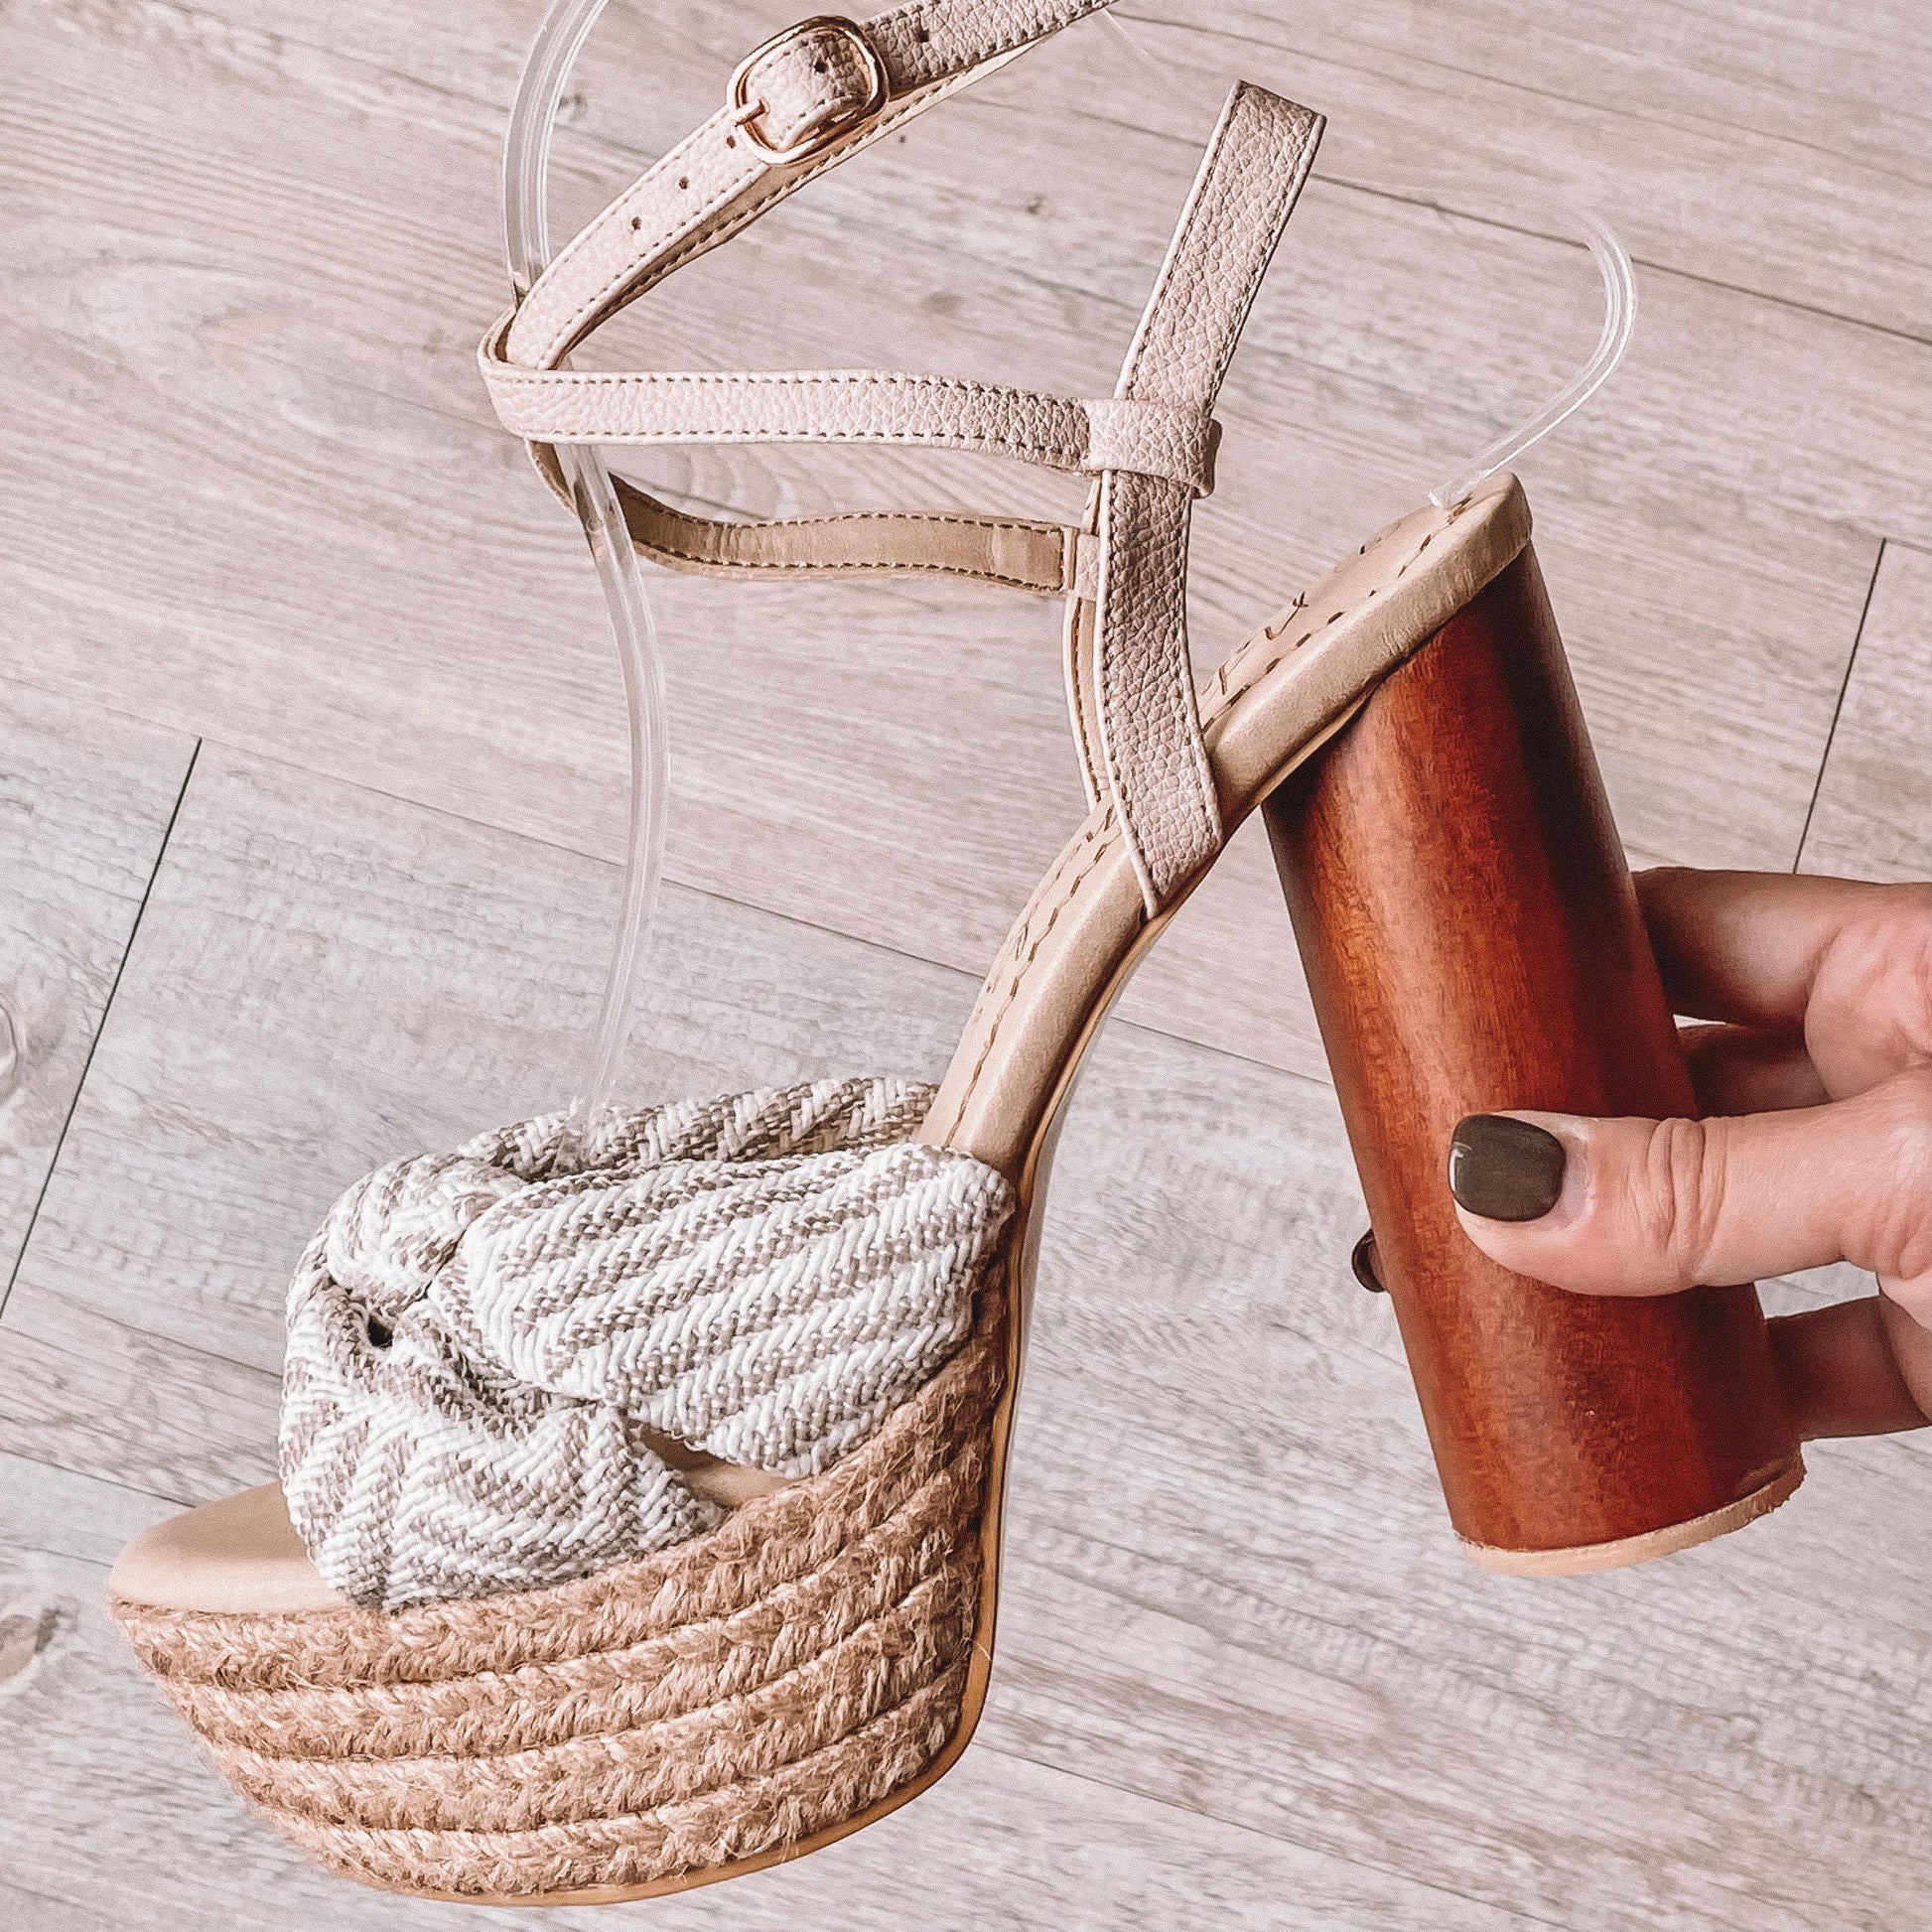 Sandal Lenna Sculptural by Nataly Mendez. Cylindrical wooden heel Platform lined with natural jute Fabric upper Genuine leather back. Handmade 5.25 inch heel height 1.75 inch platform